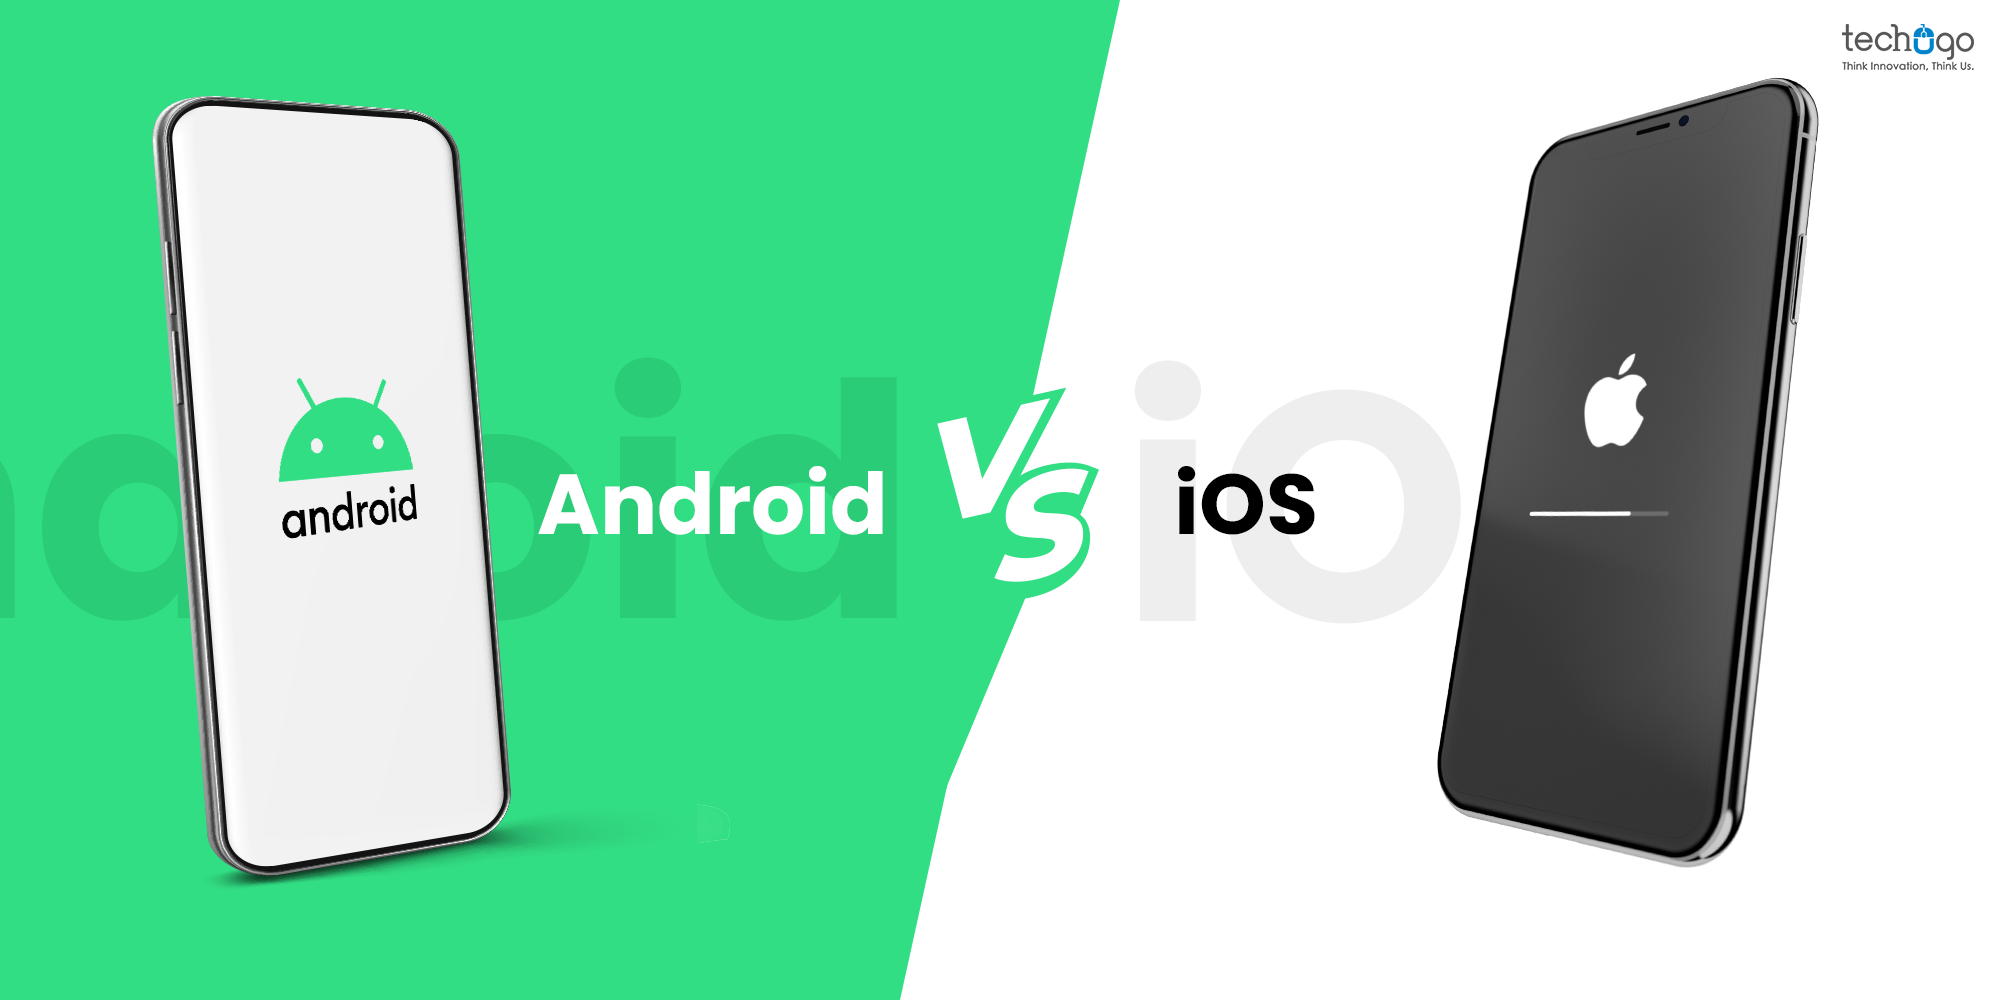 Android vs iOS- Understanding The Technical Superiority Of The Best Platform